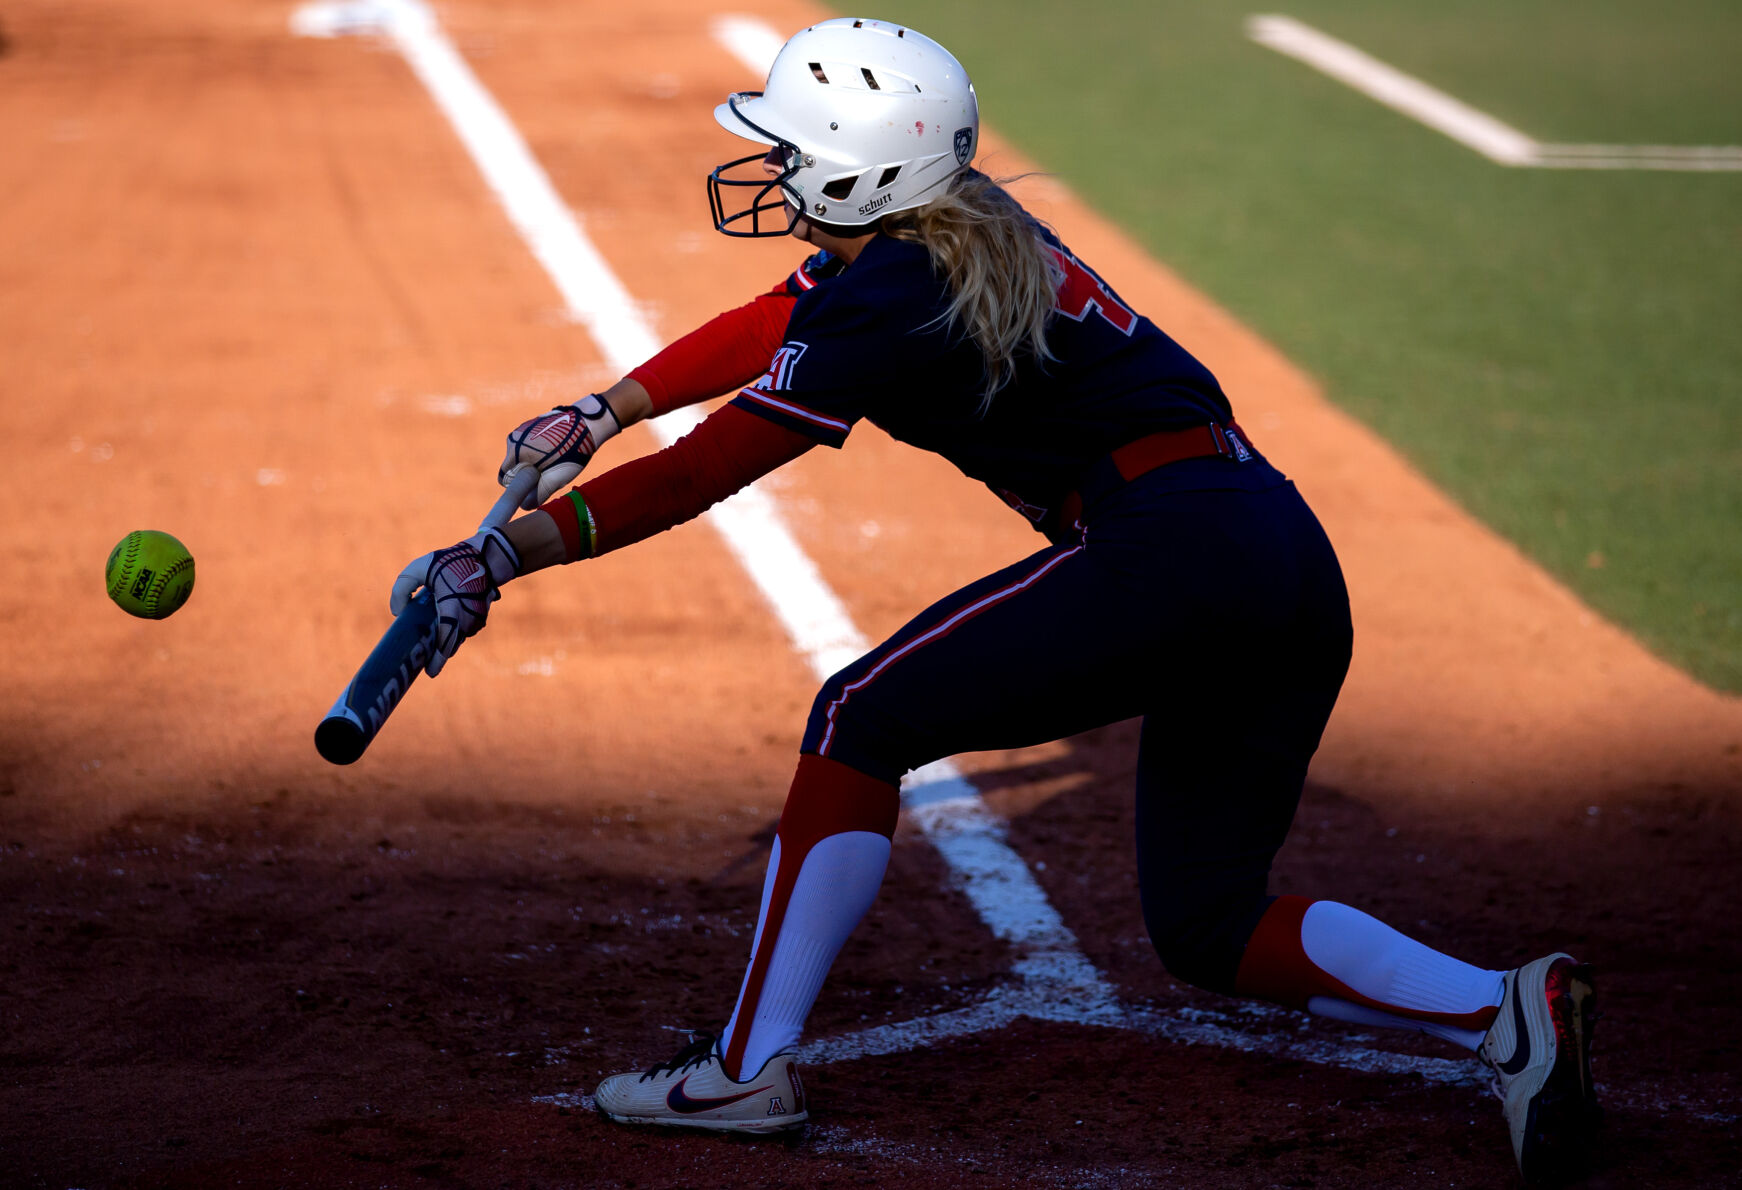 Montana Fouts, Alabama put Wildcats on brink of Womens College World Series elimination